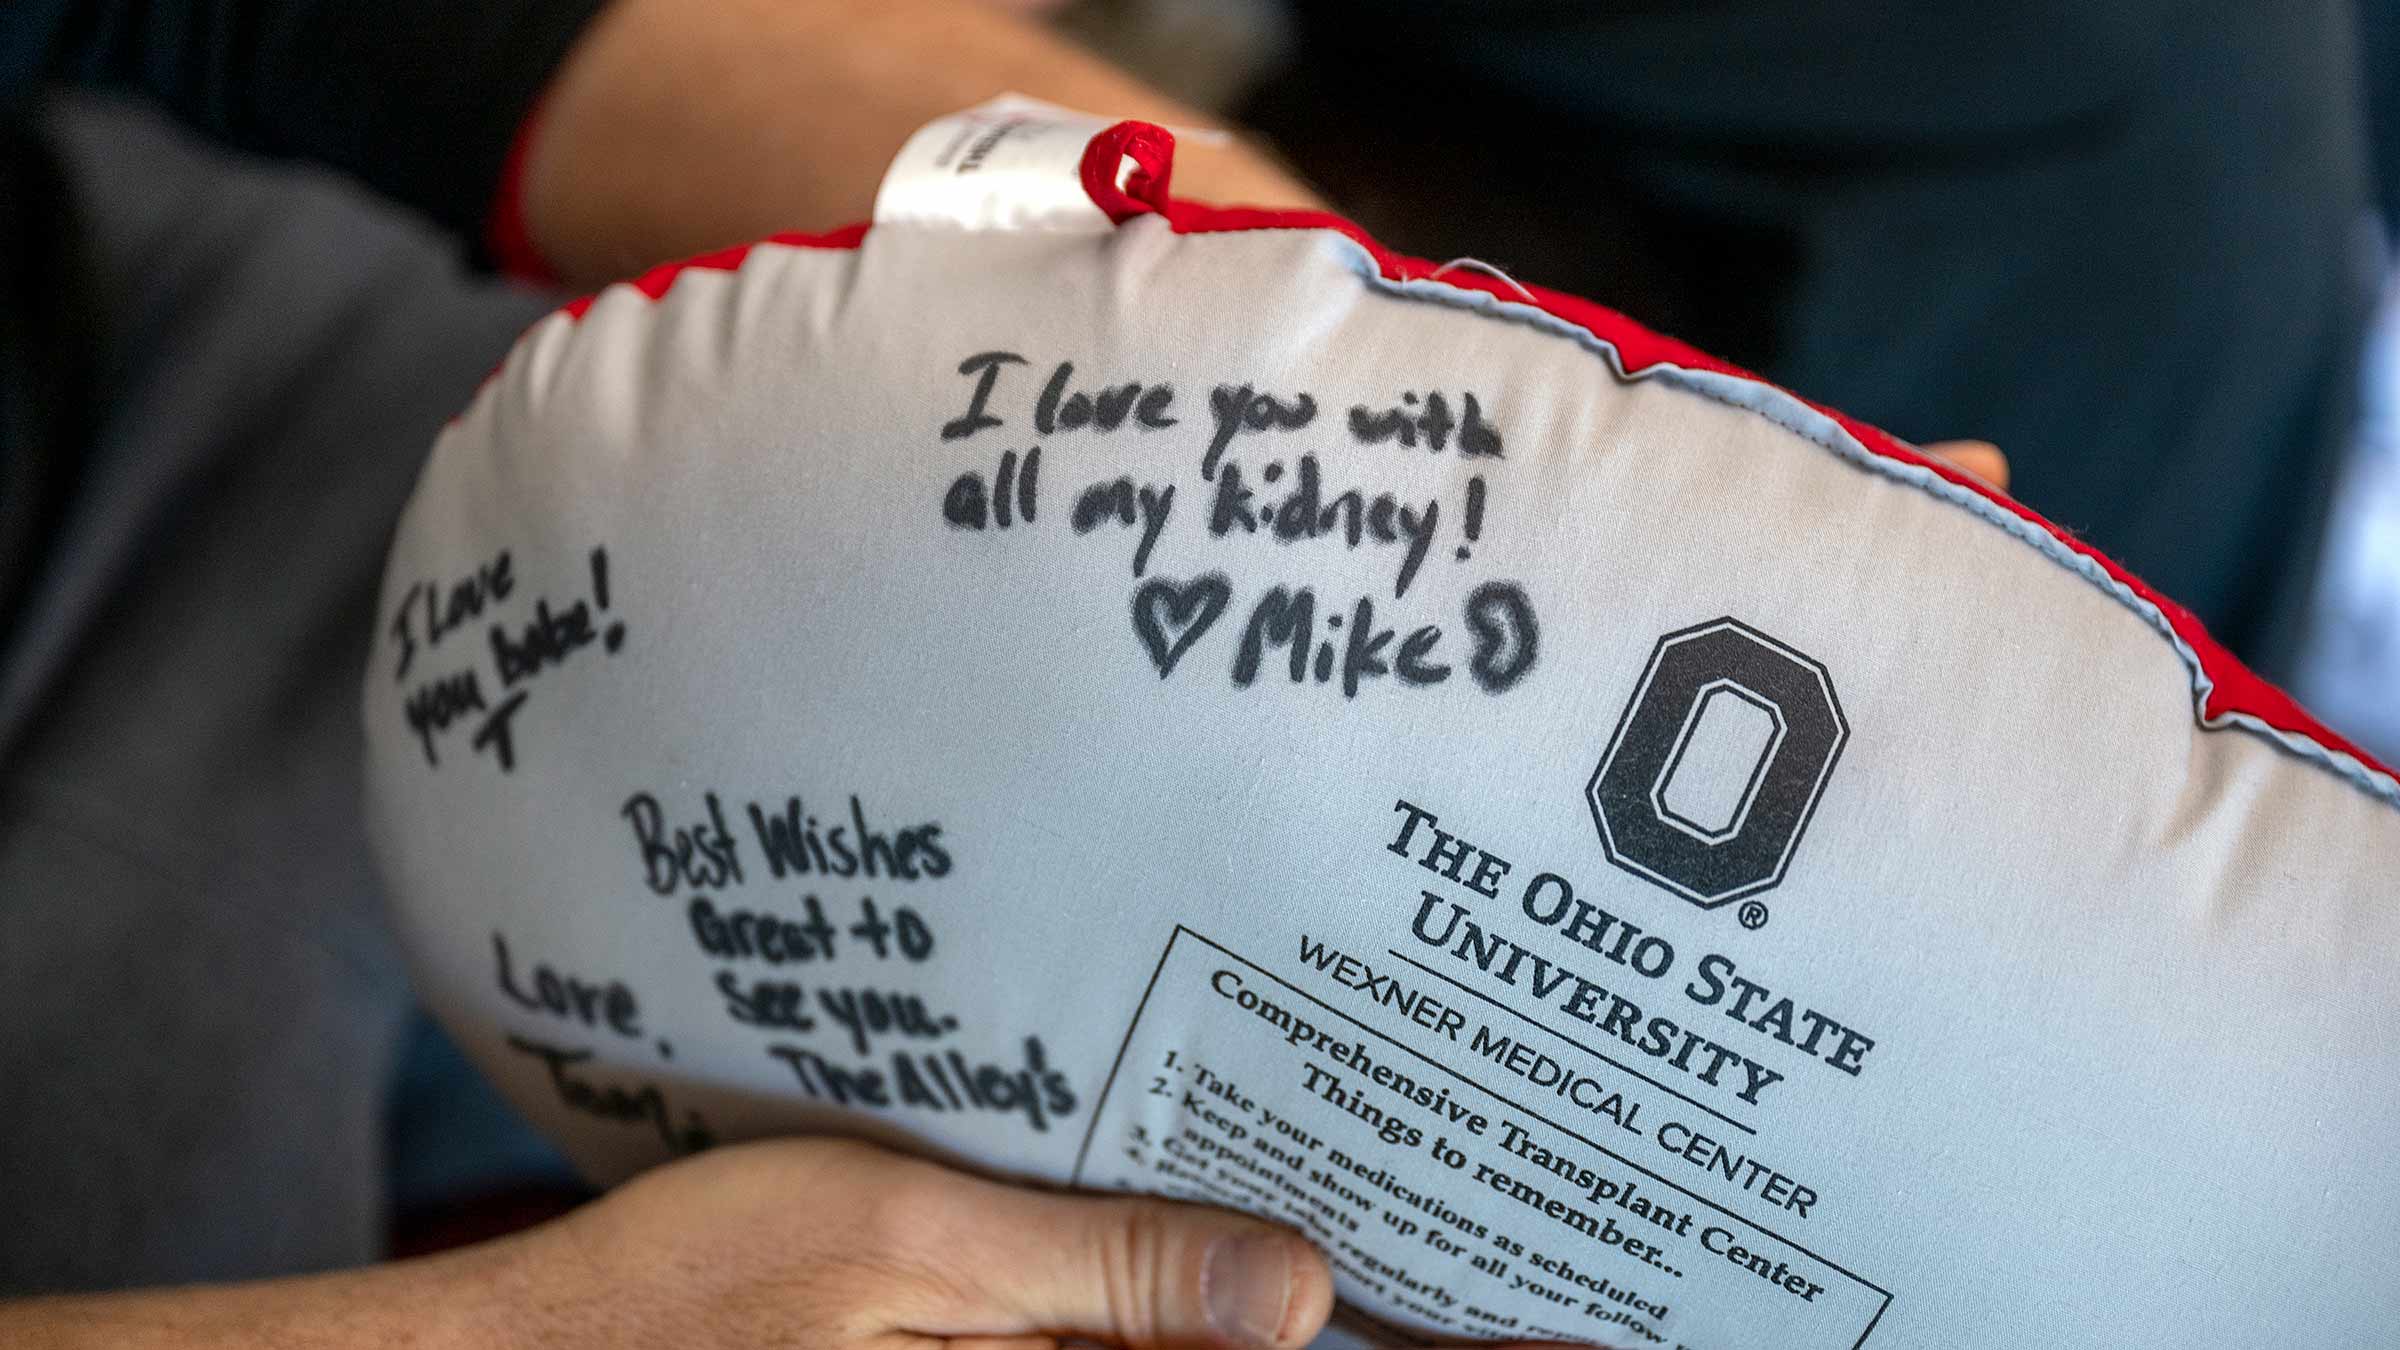 A kidney pillow with handwritten messages, one of them reads: "I love you with all my kidney. Mike."